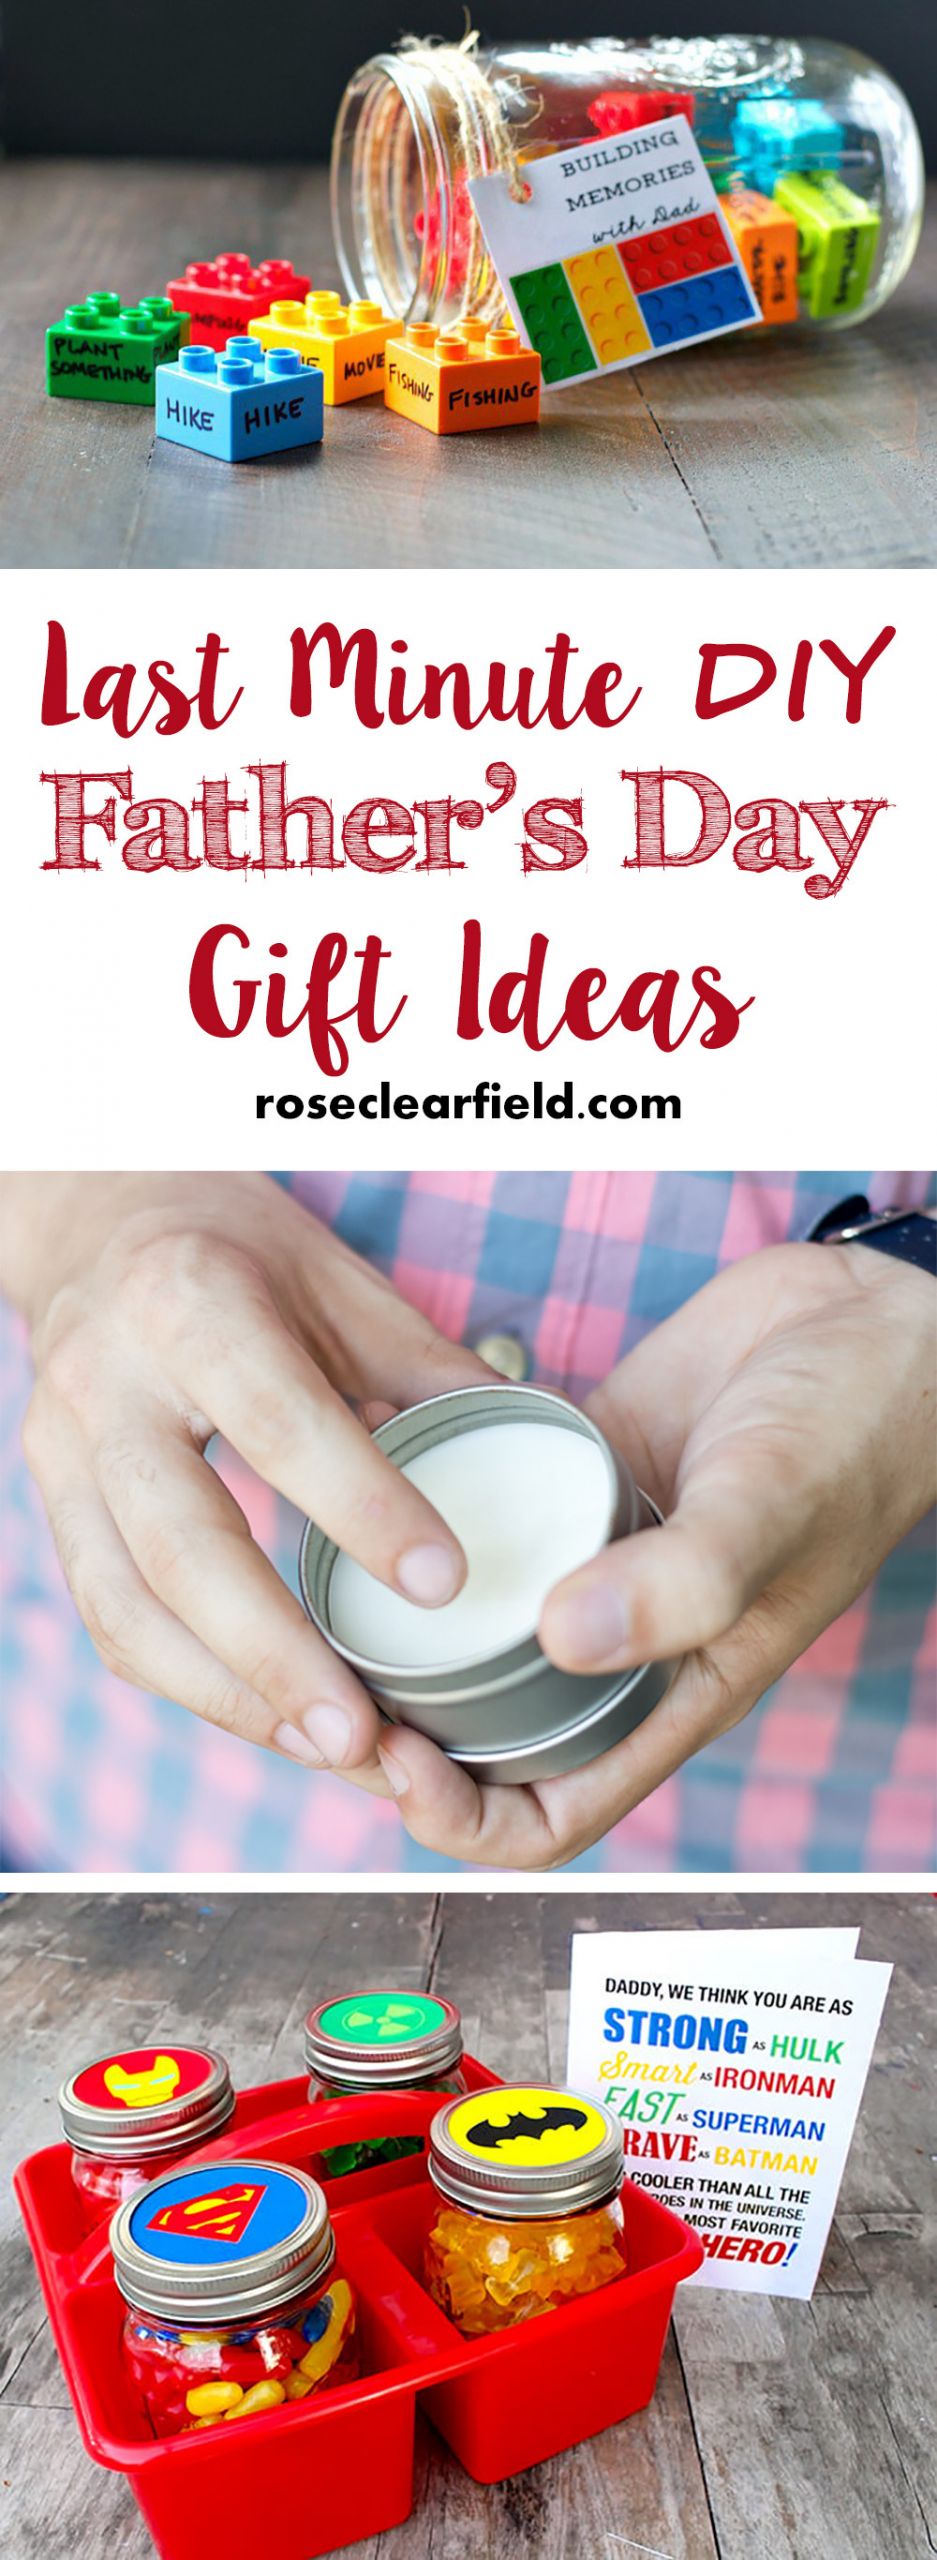 Father'S Day Gift Ideas DIY
 Last Minute DIY Father s Day Gift Ideas • Rose Clearfield